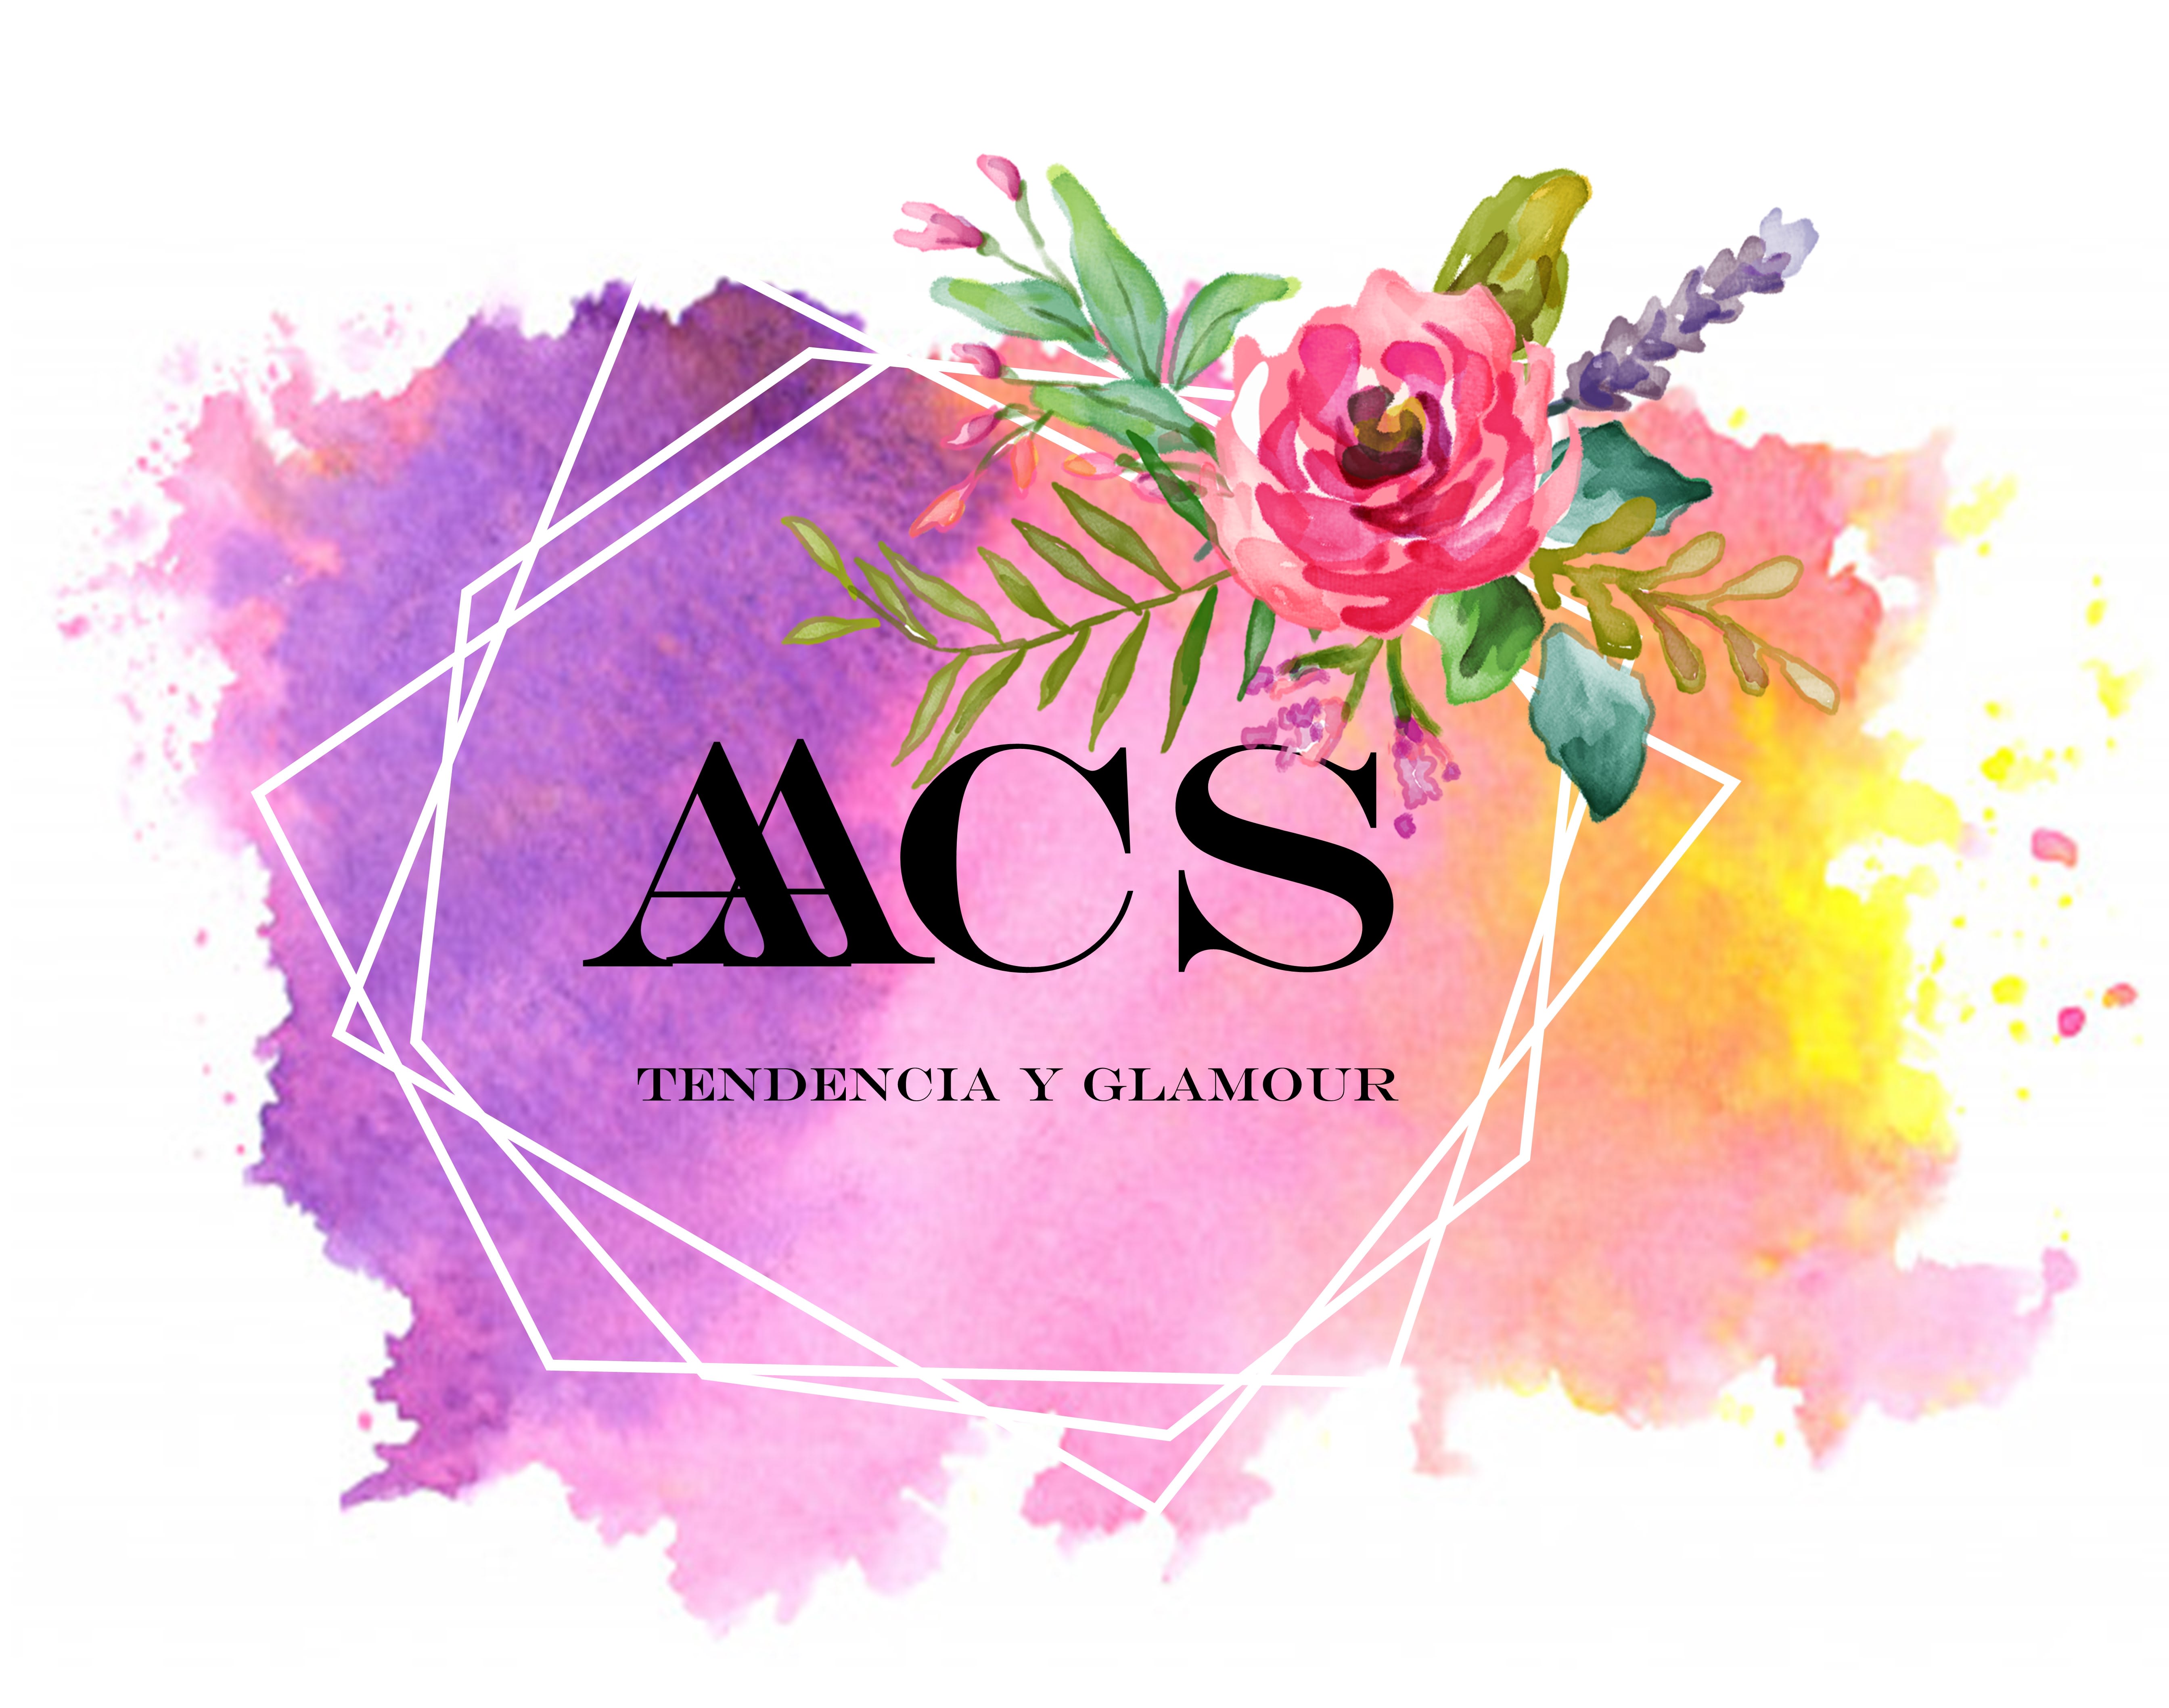 Aacs Tendencia y Glamour